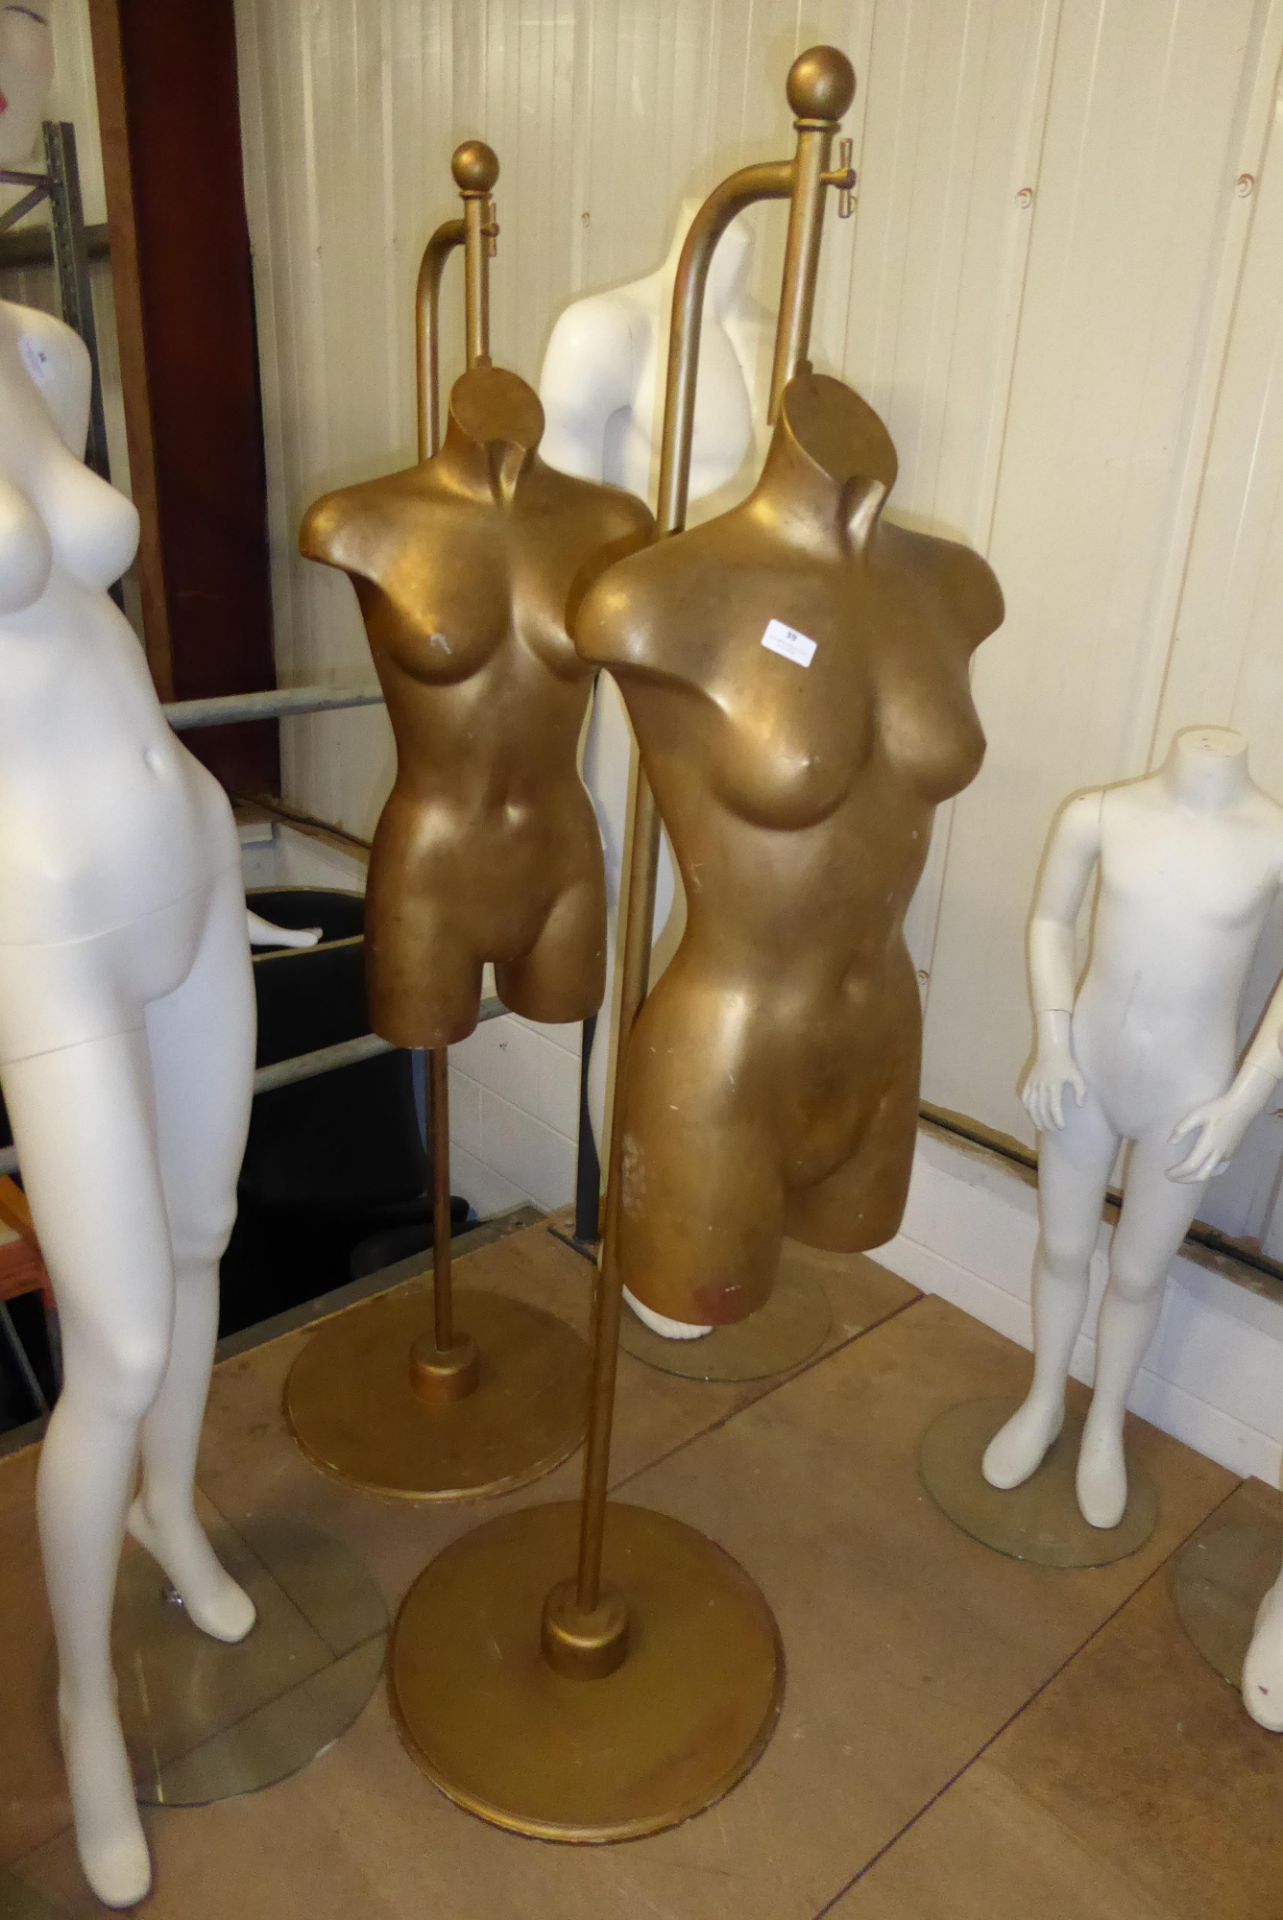 * Pair of suspended female torsos on stands with distressed gold effect